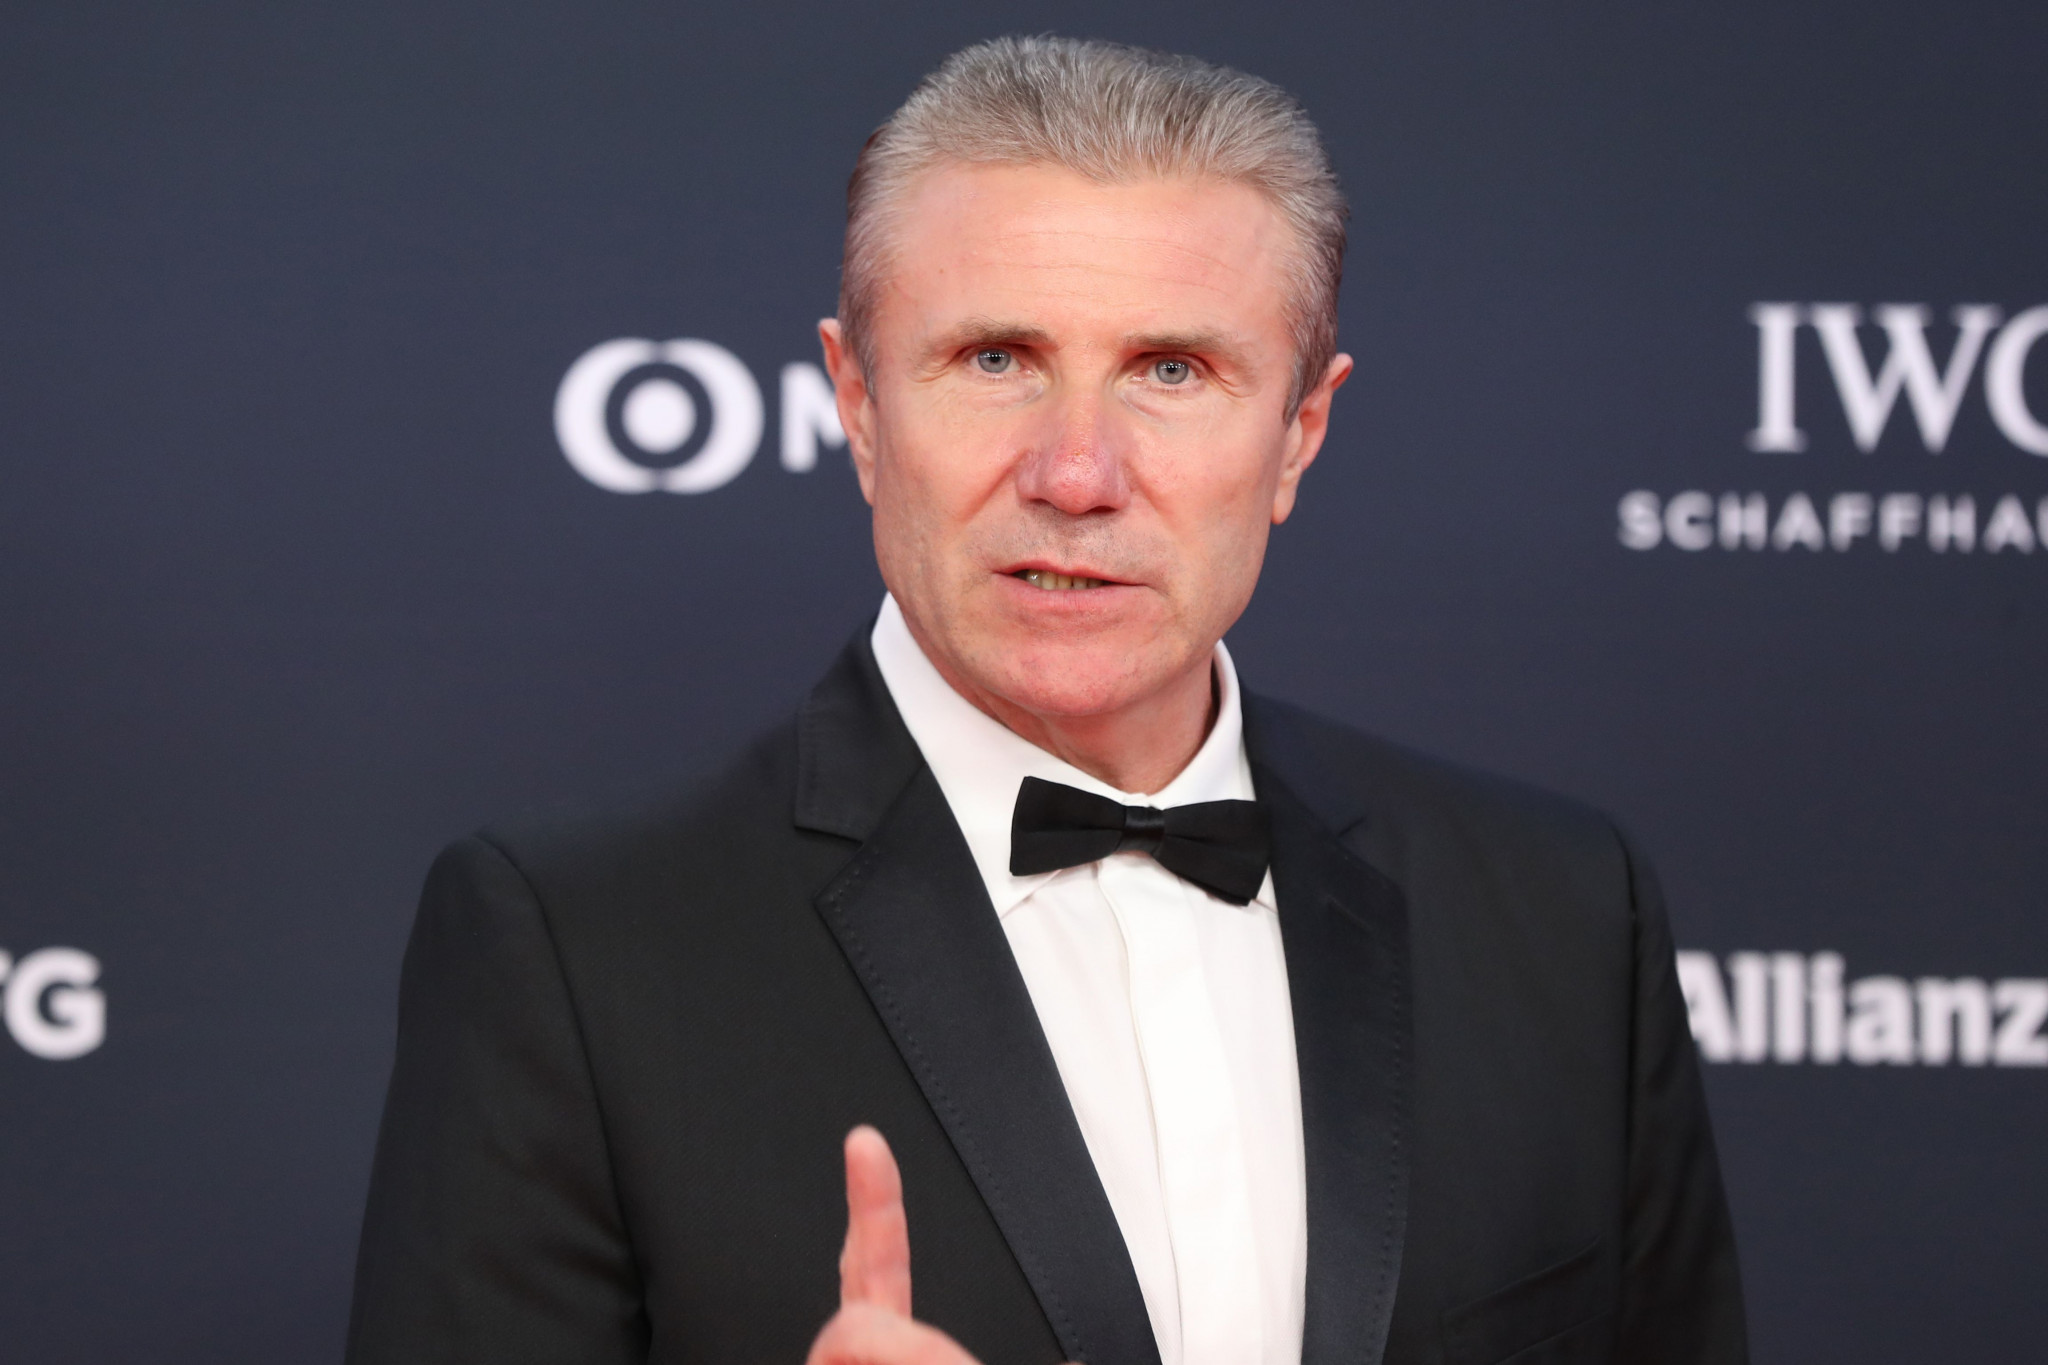 Bubka cleared of wrongdoing by AIU in relation to payments made to disgraced former IAAF treasurer